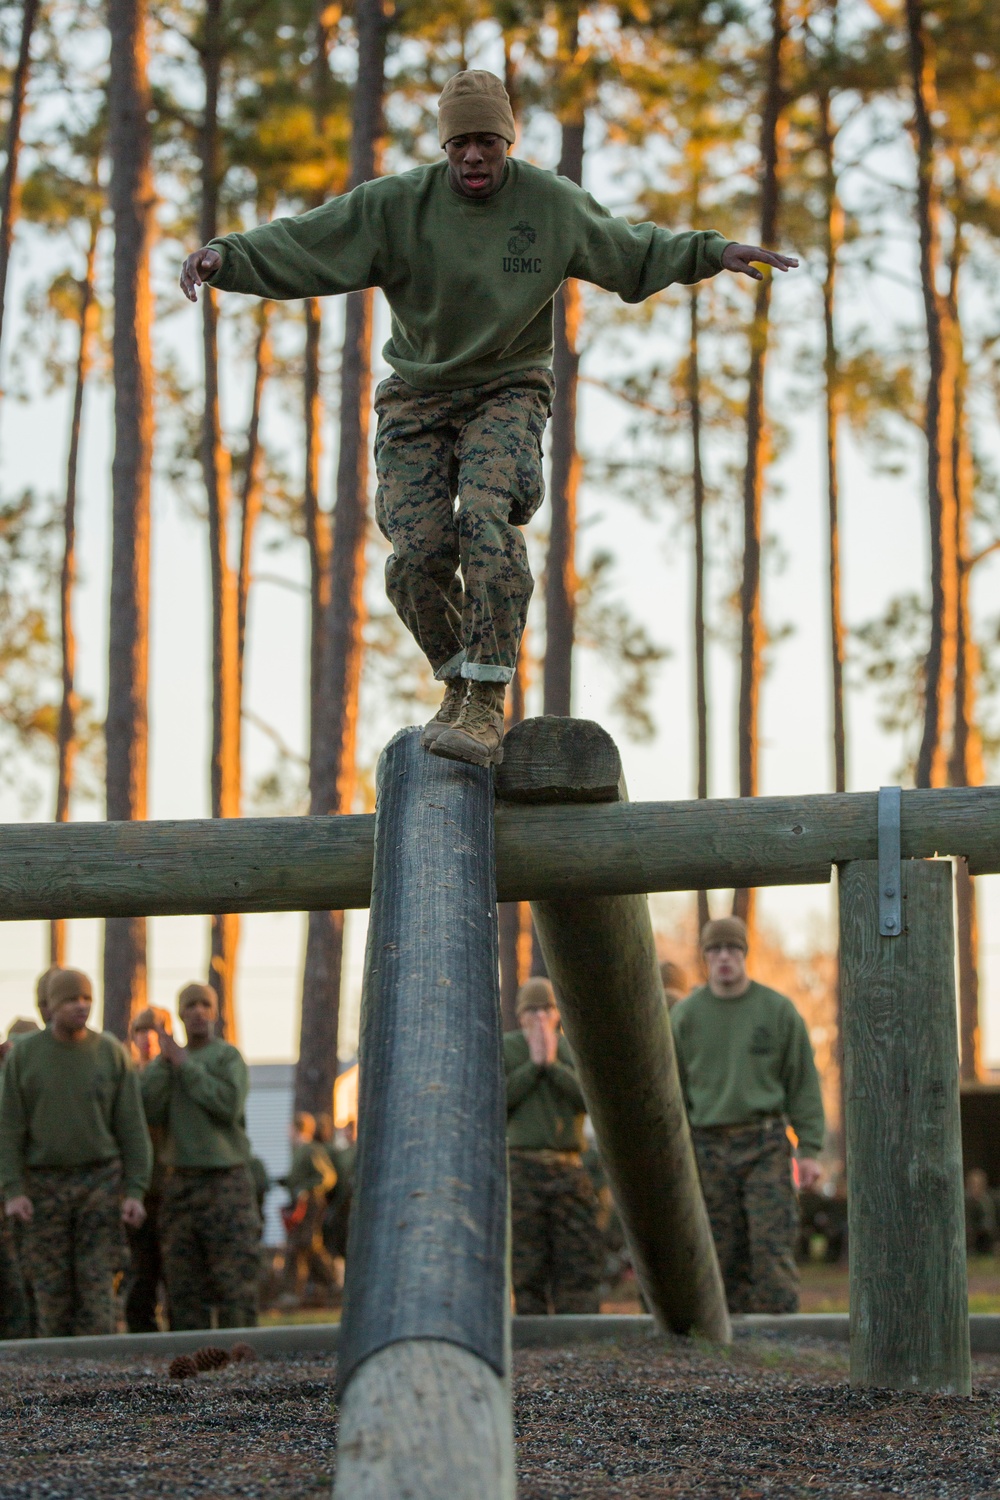 Marine recruits conquer fears on Parris Island’s Confidence Course